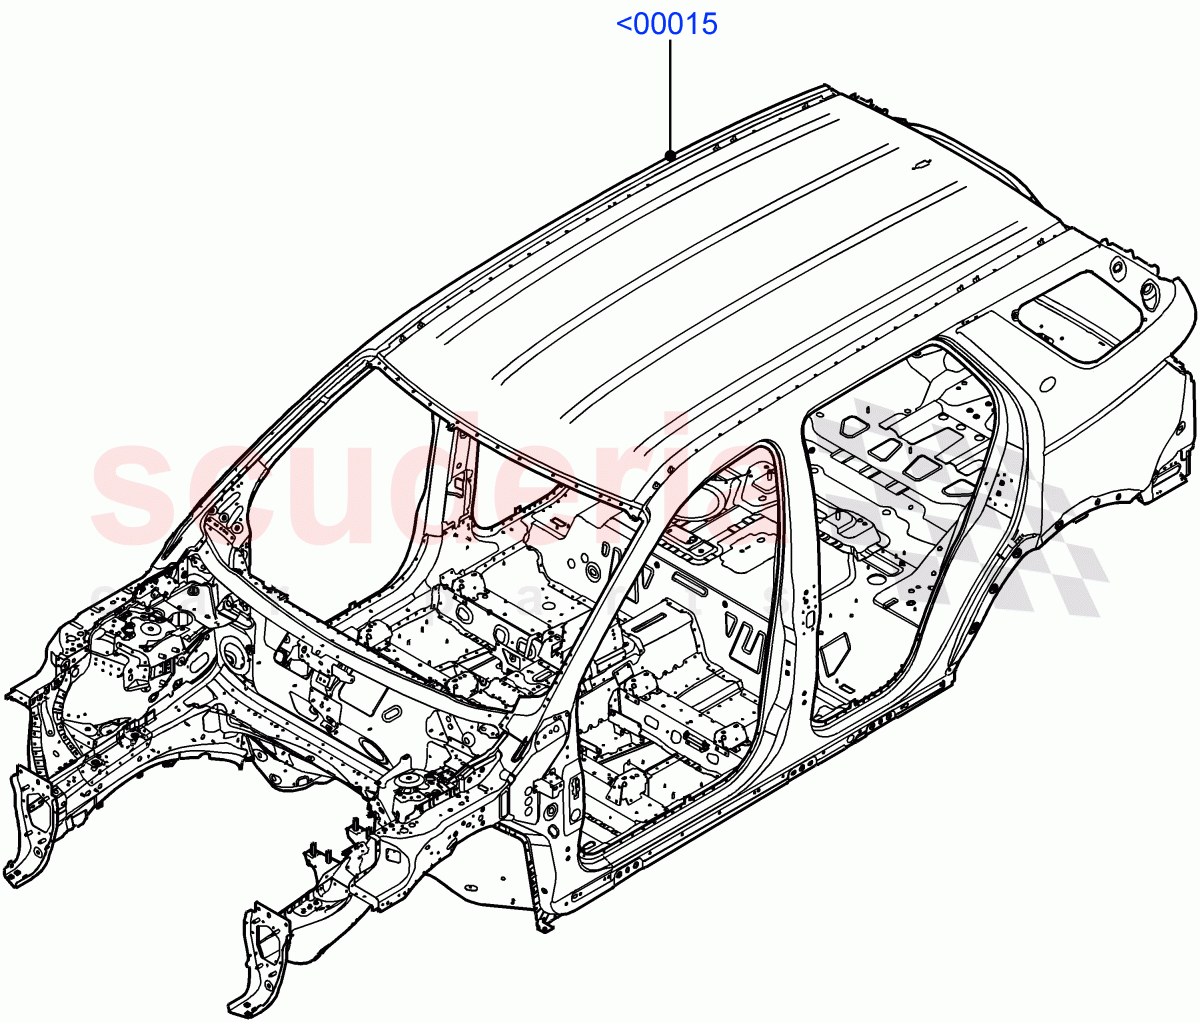 Bodyshell(Changsu (China))((V)FROMFG000001) of Land Rover Land Rover Discovery Sport (2015+) [2.2 Single Turbo Diesel]